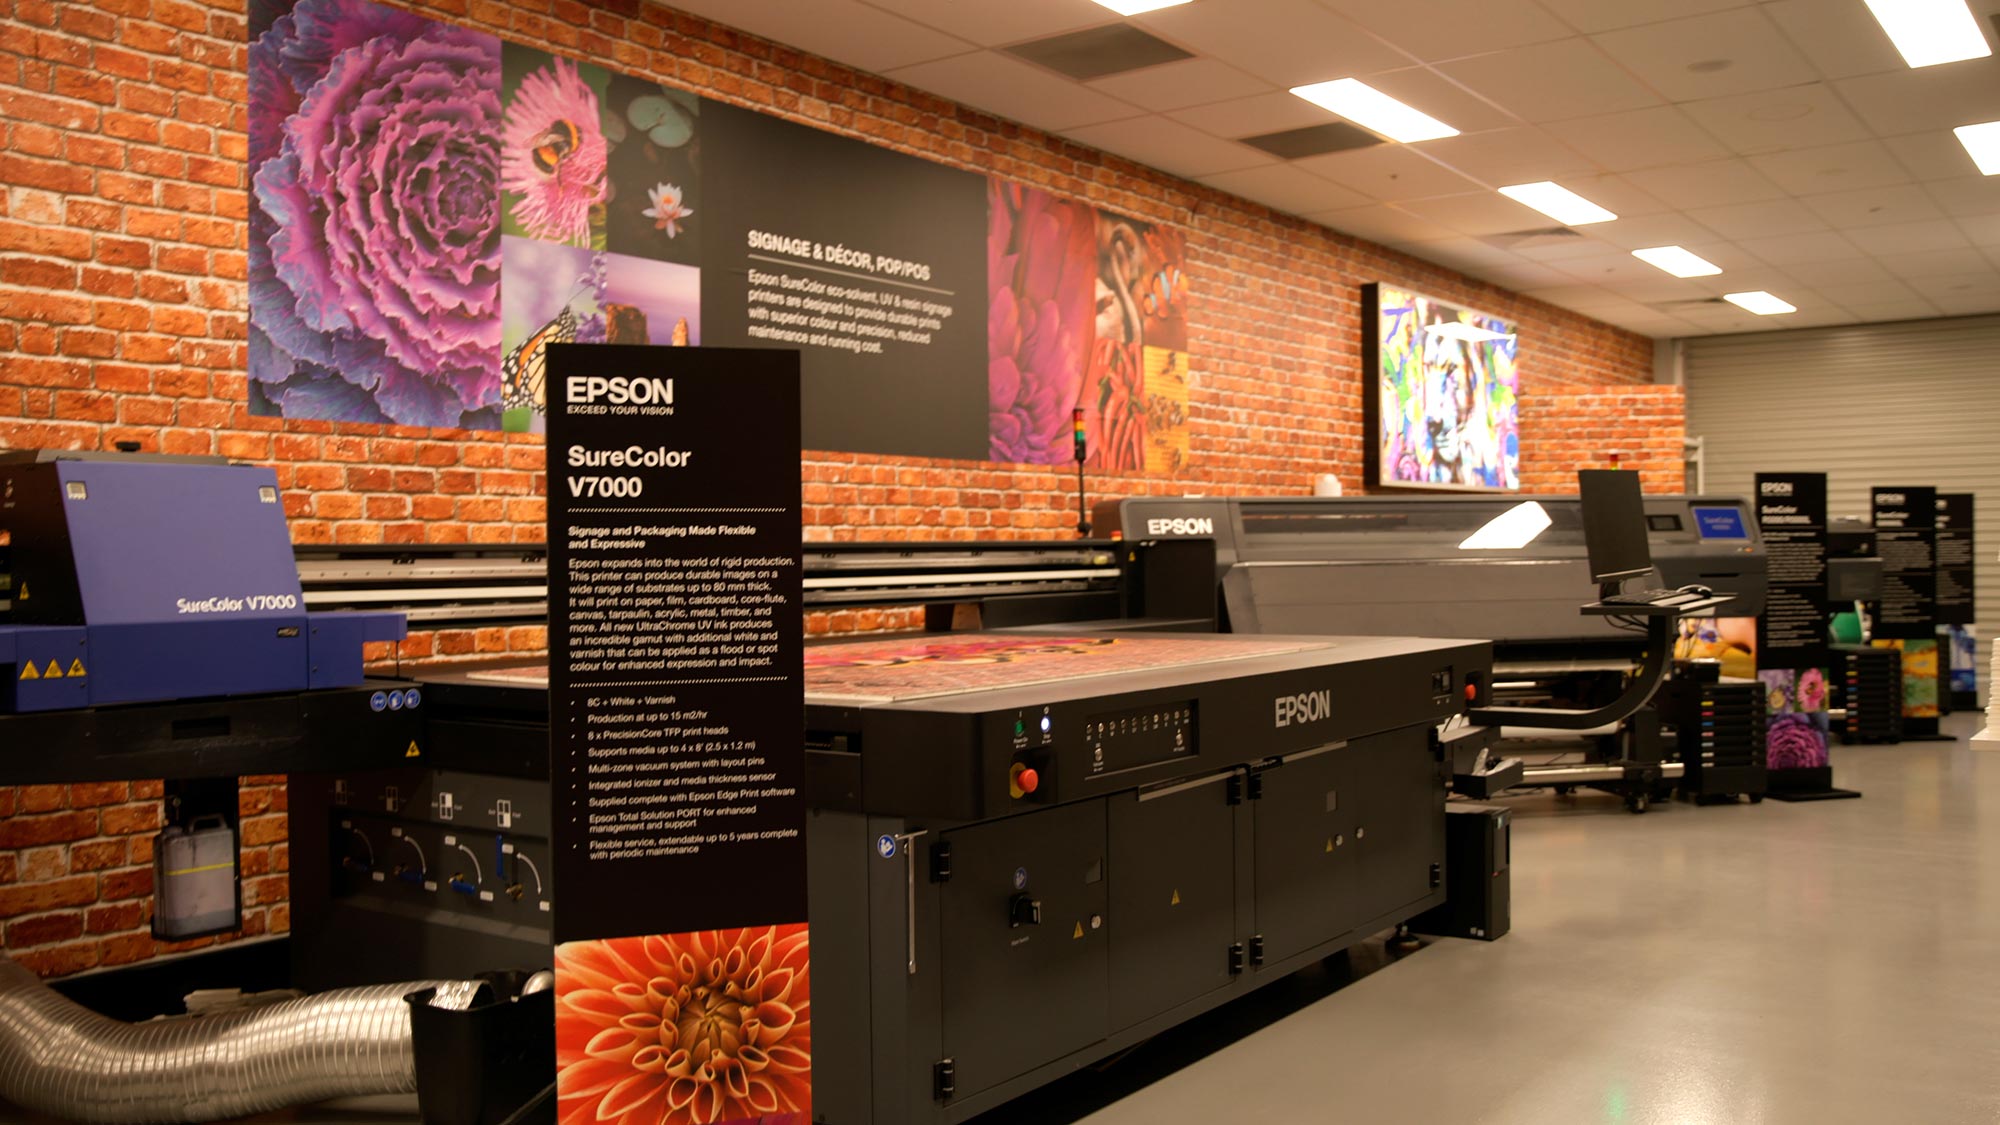 The SureColor V7000 printer as displayed in Yennora experience centre